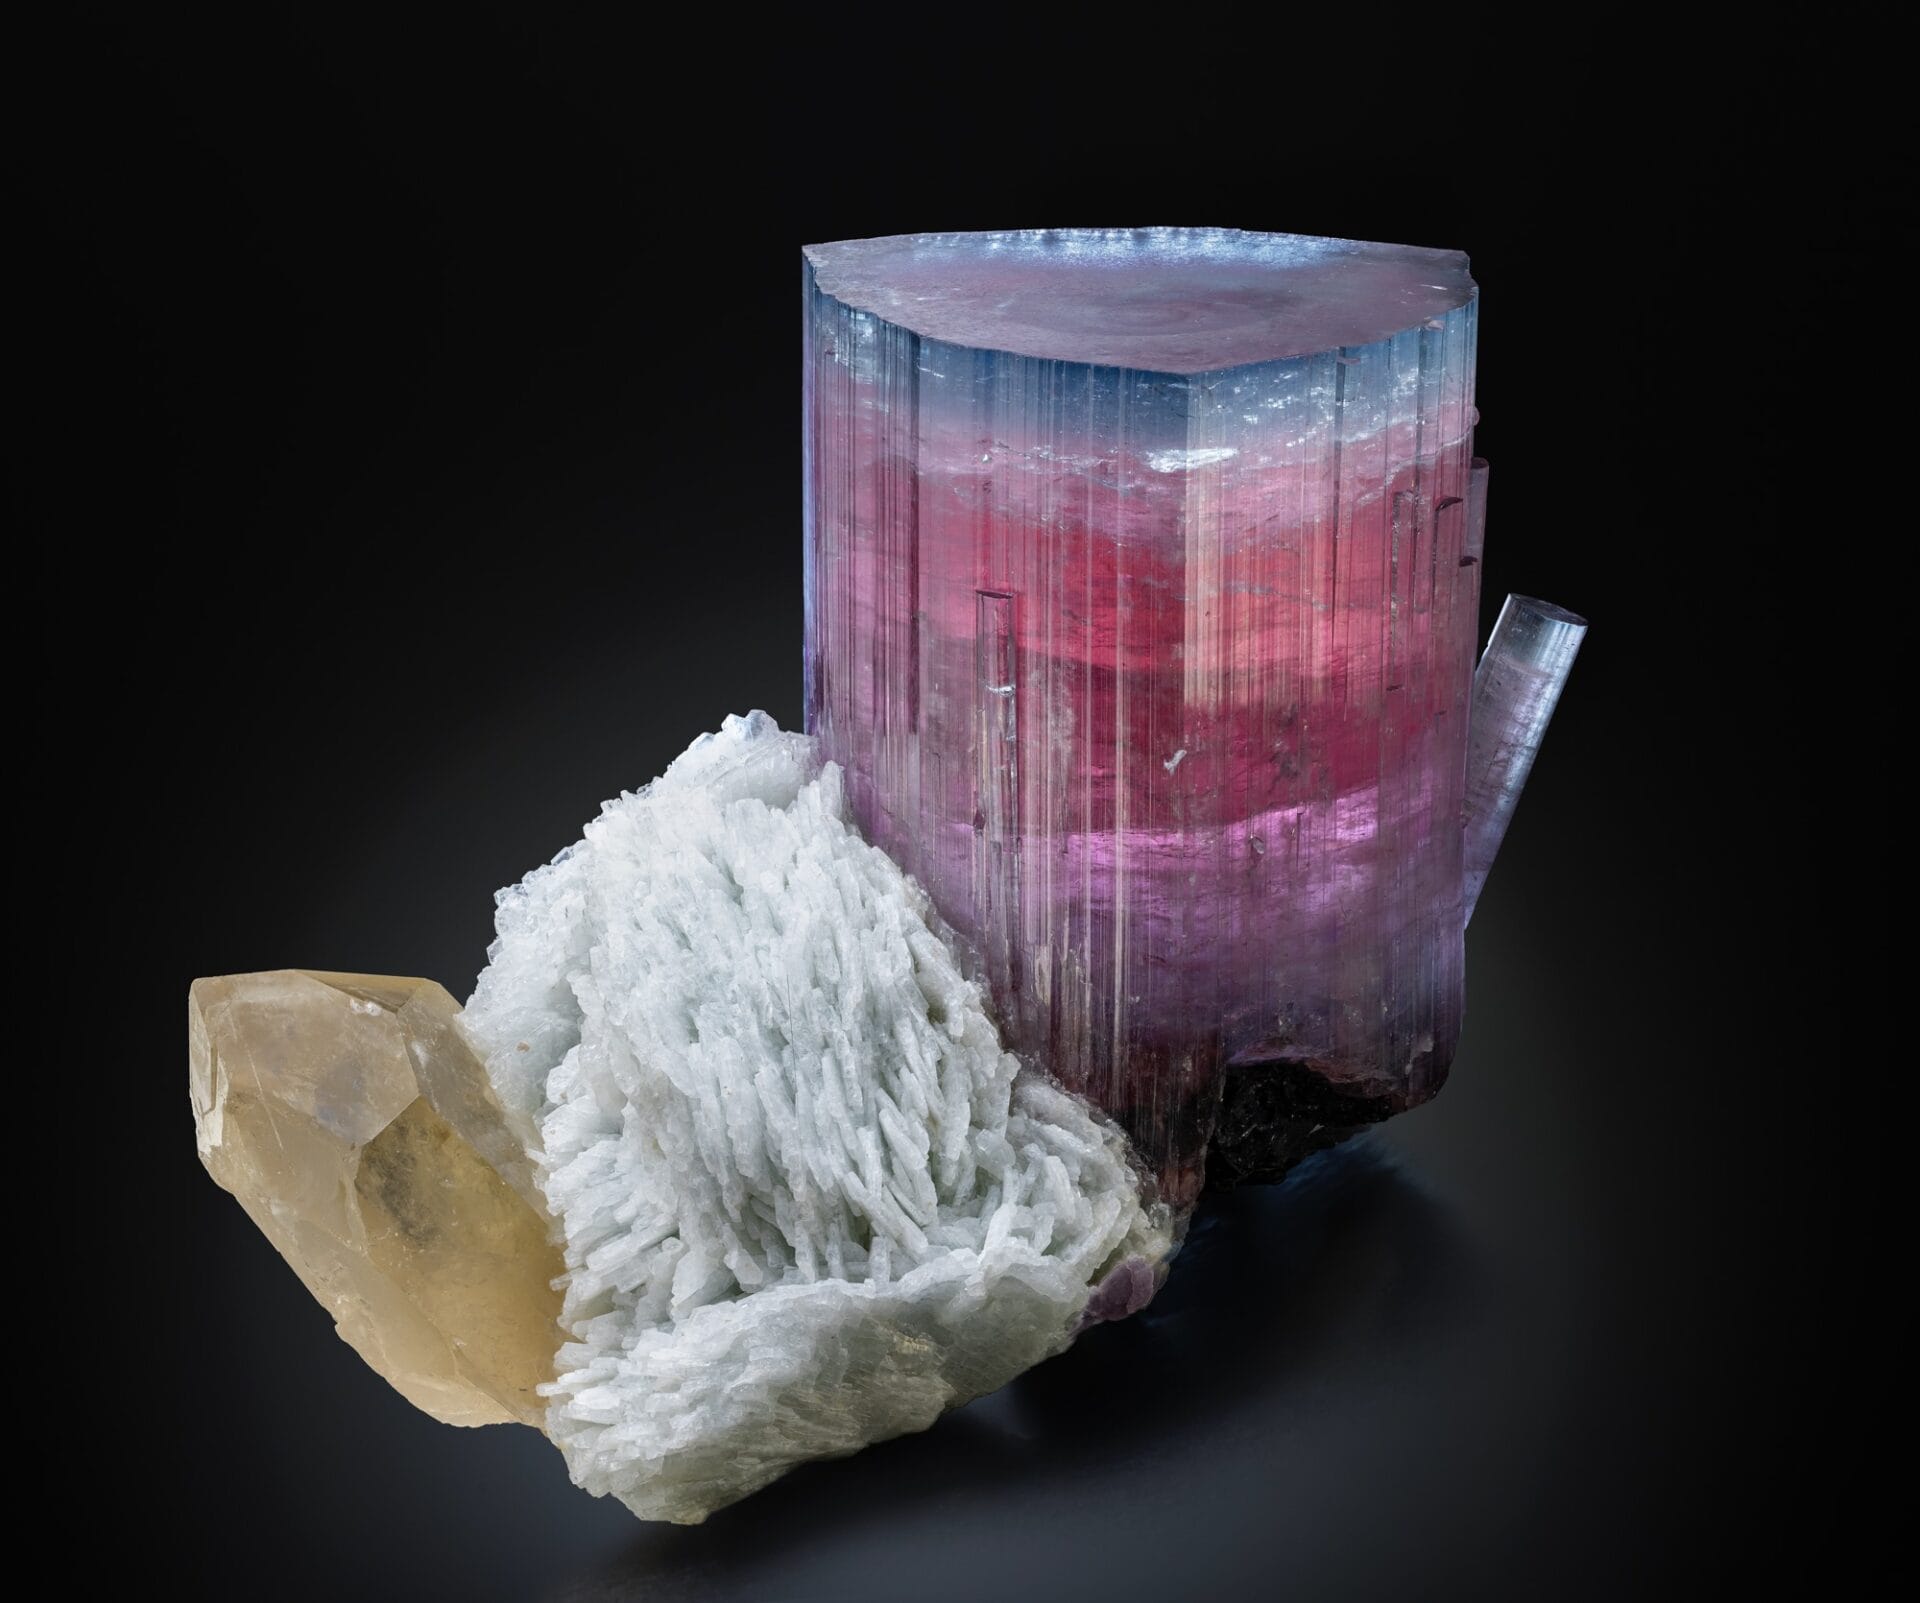 A composite mineral with different types of crystals and textures.